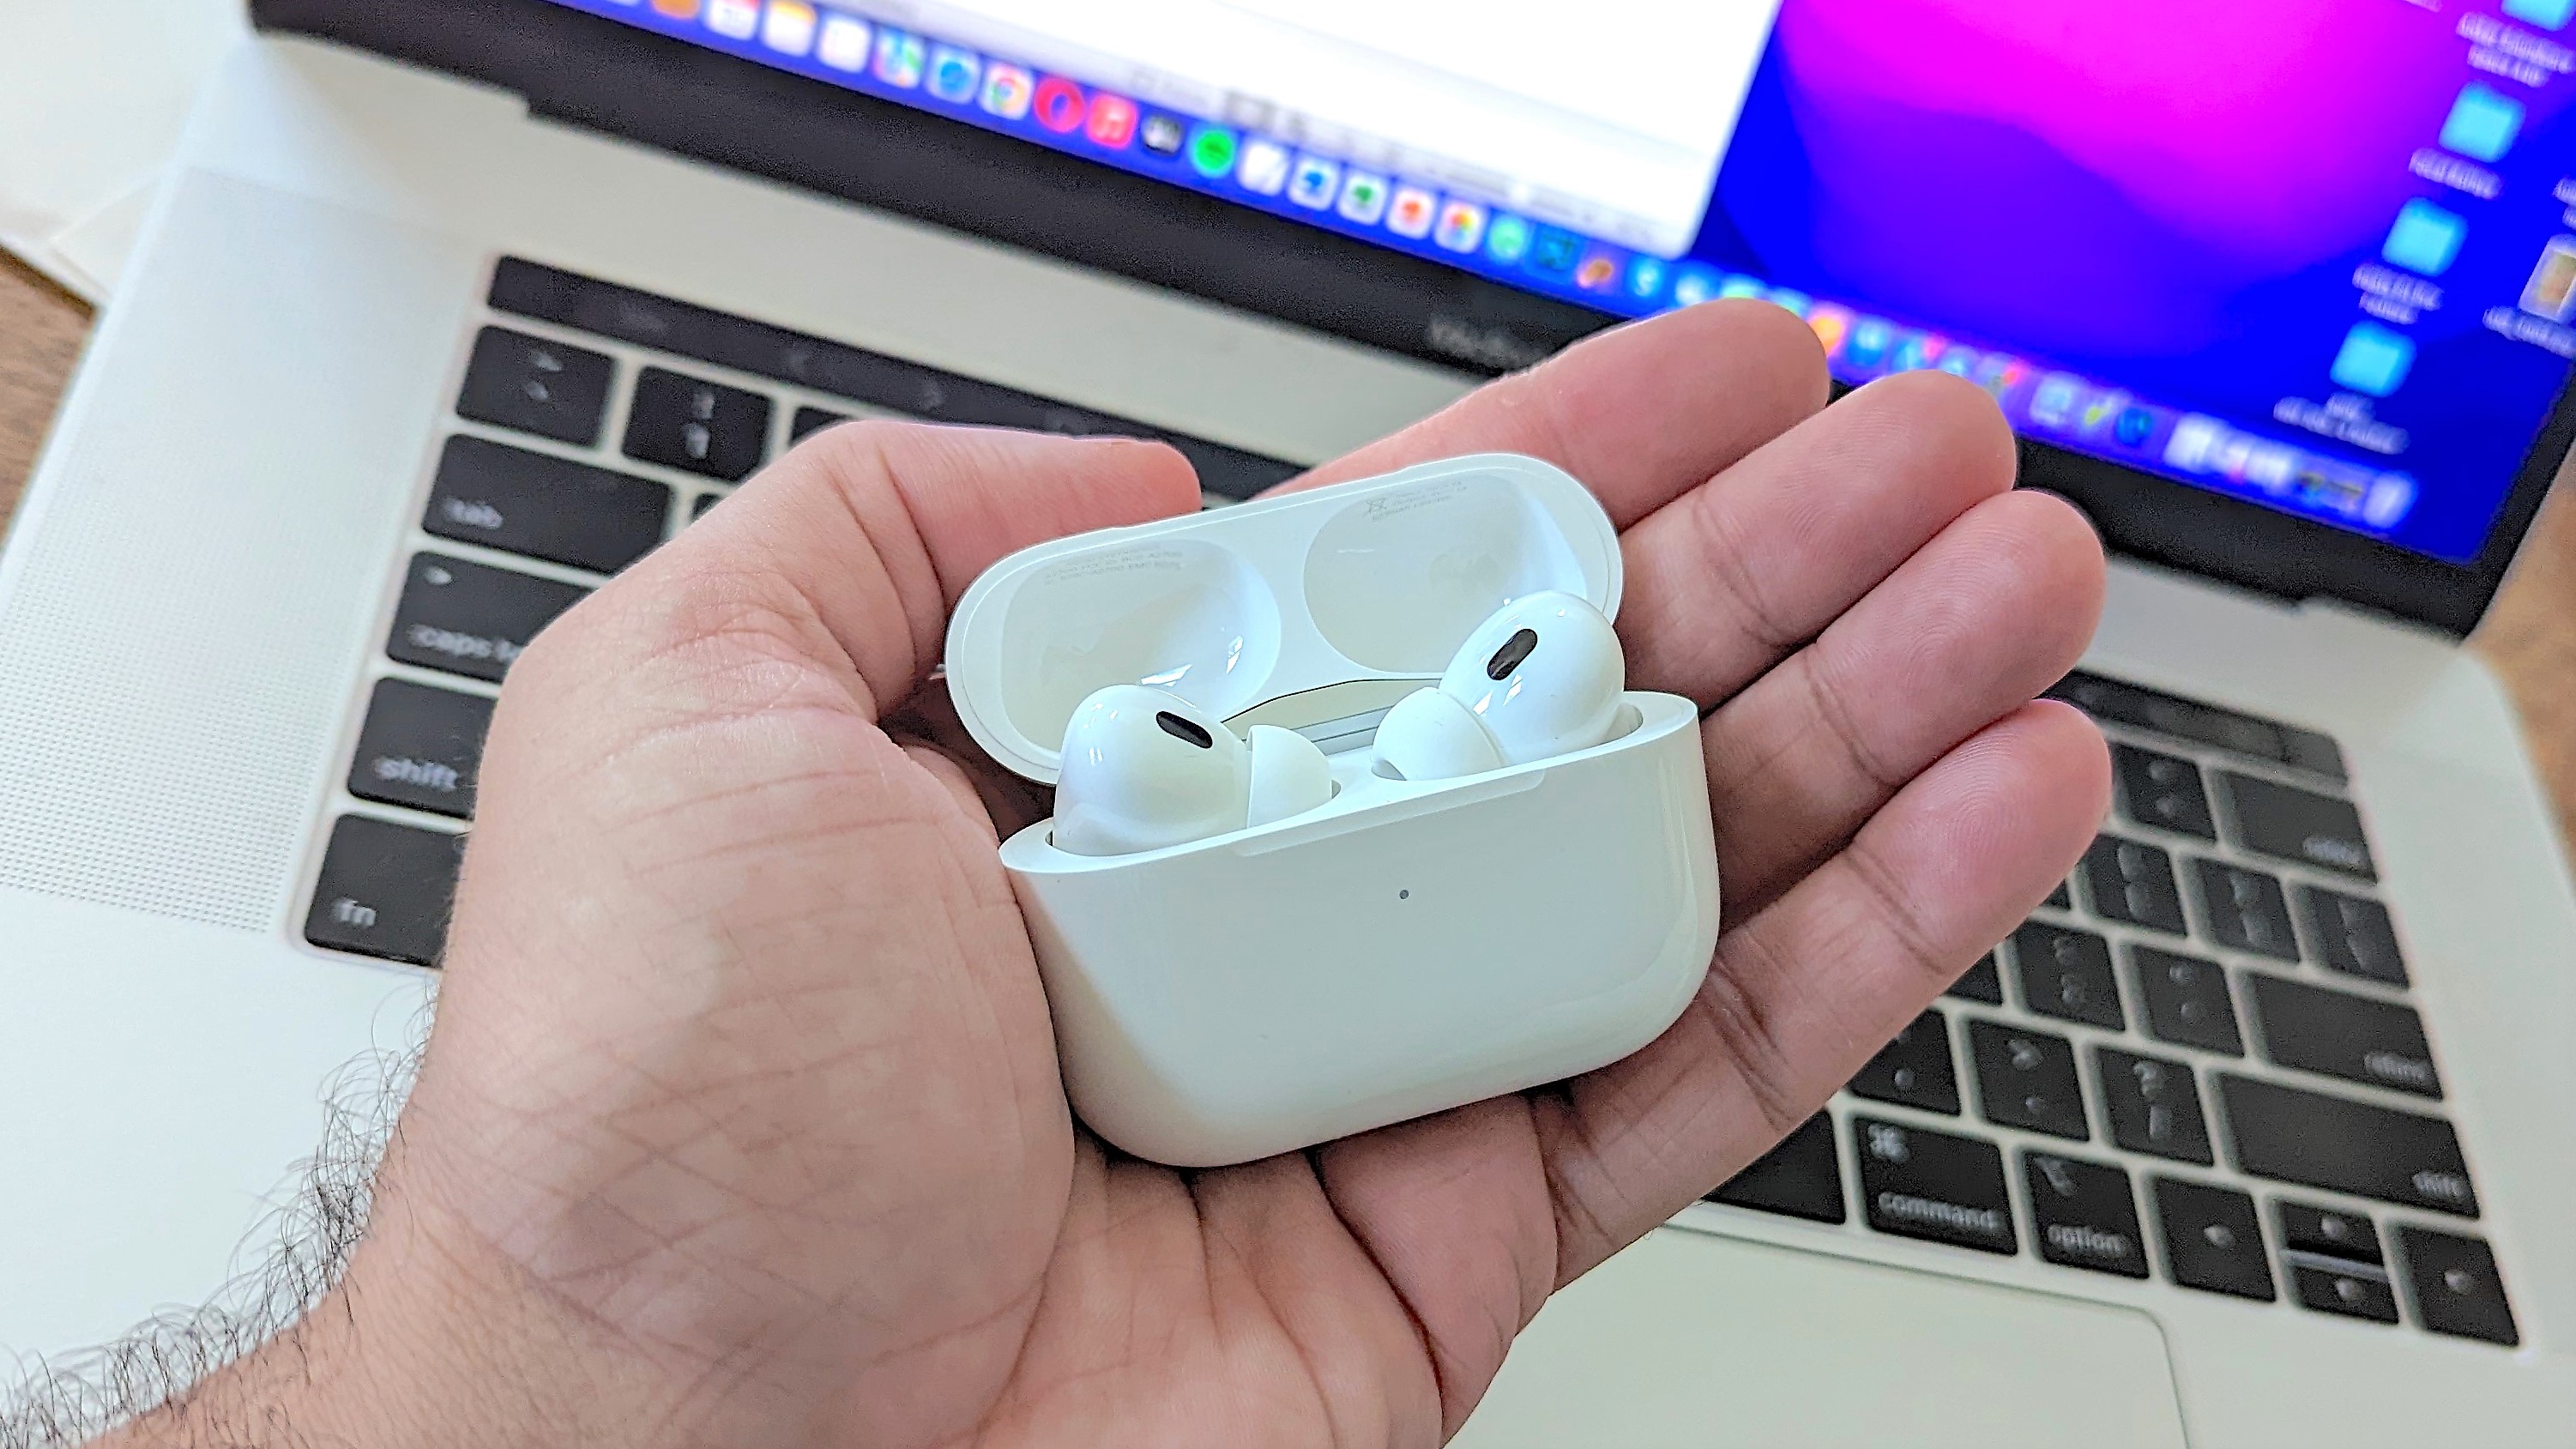 Apple AirPods Pro 2 in hand of reviewer